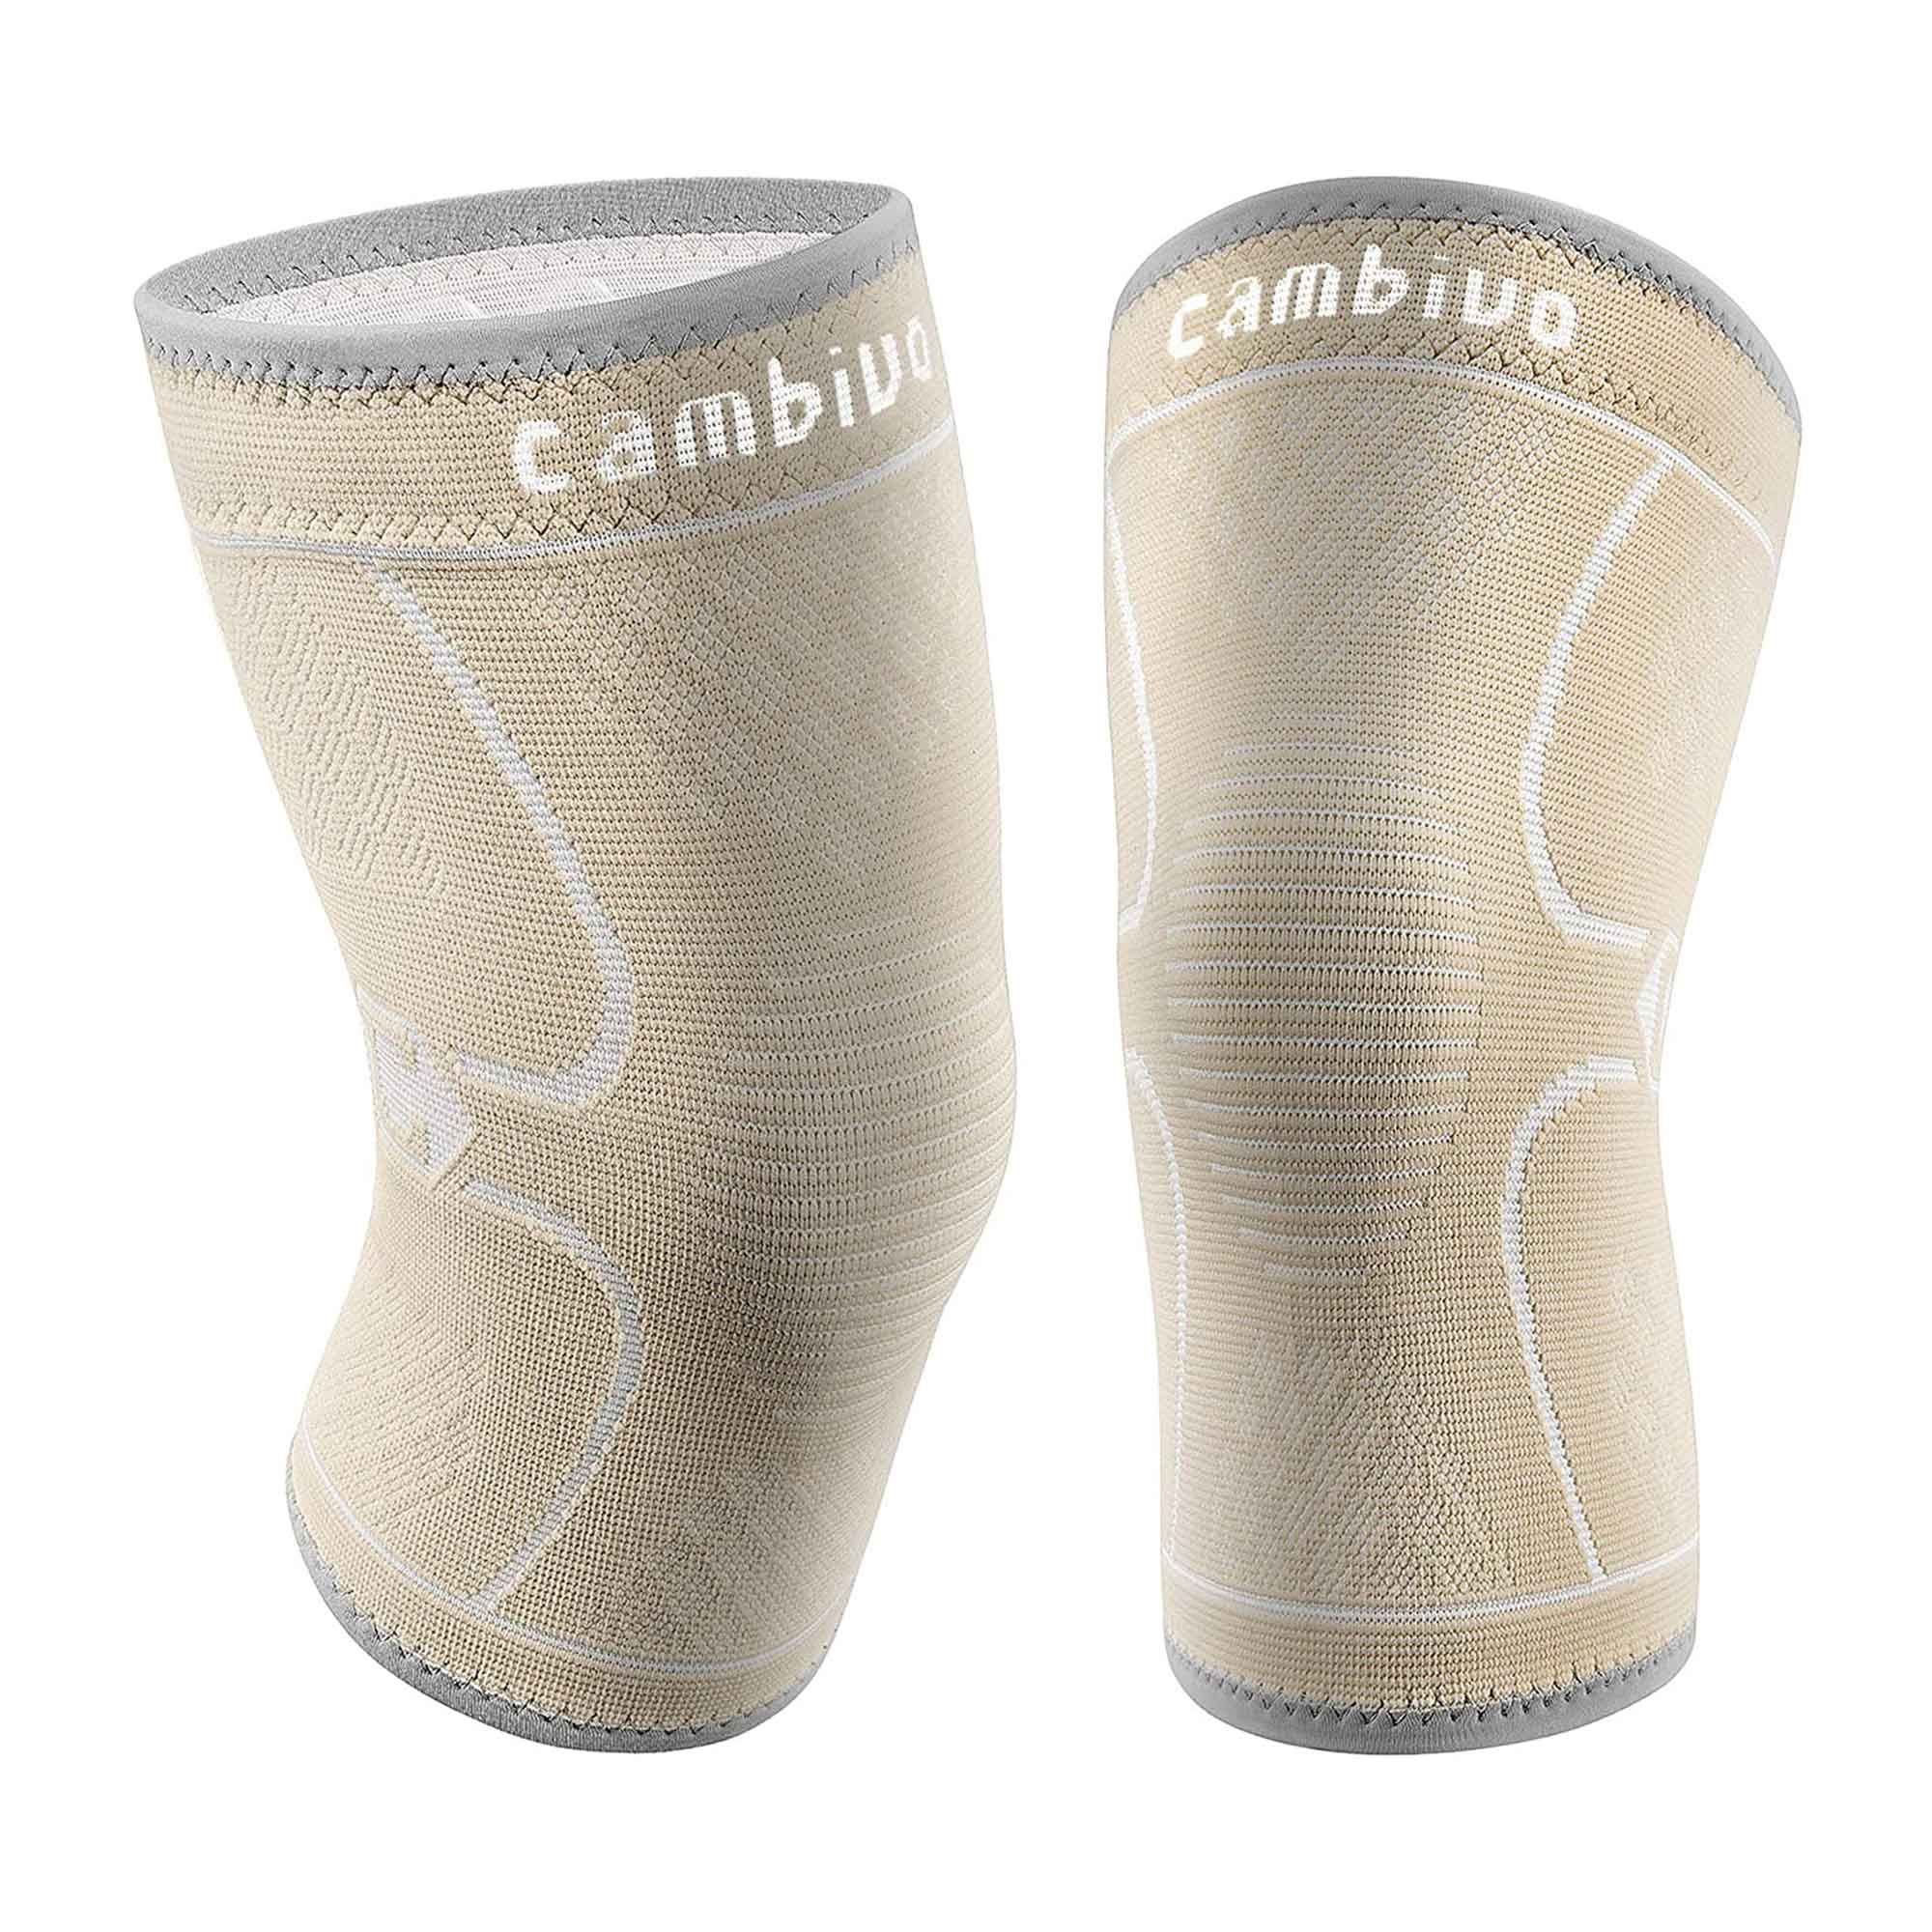 CAMBIVO 2 Pack Knee Brace, Knee Compression Sleeve Support for Men